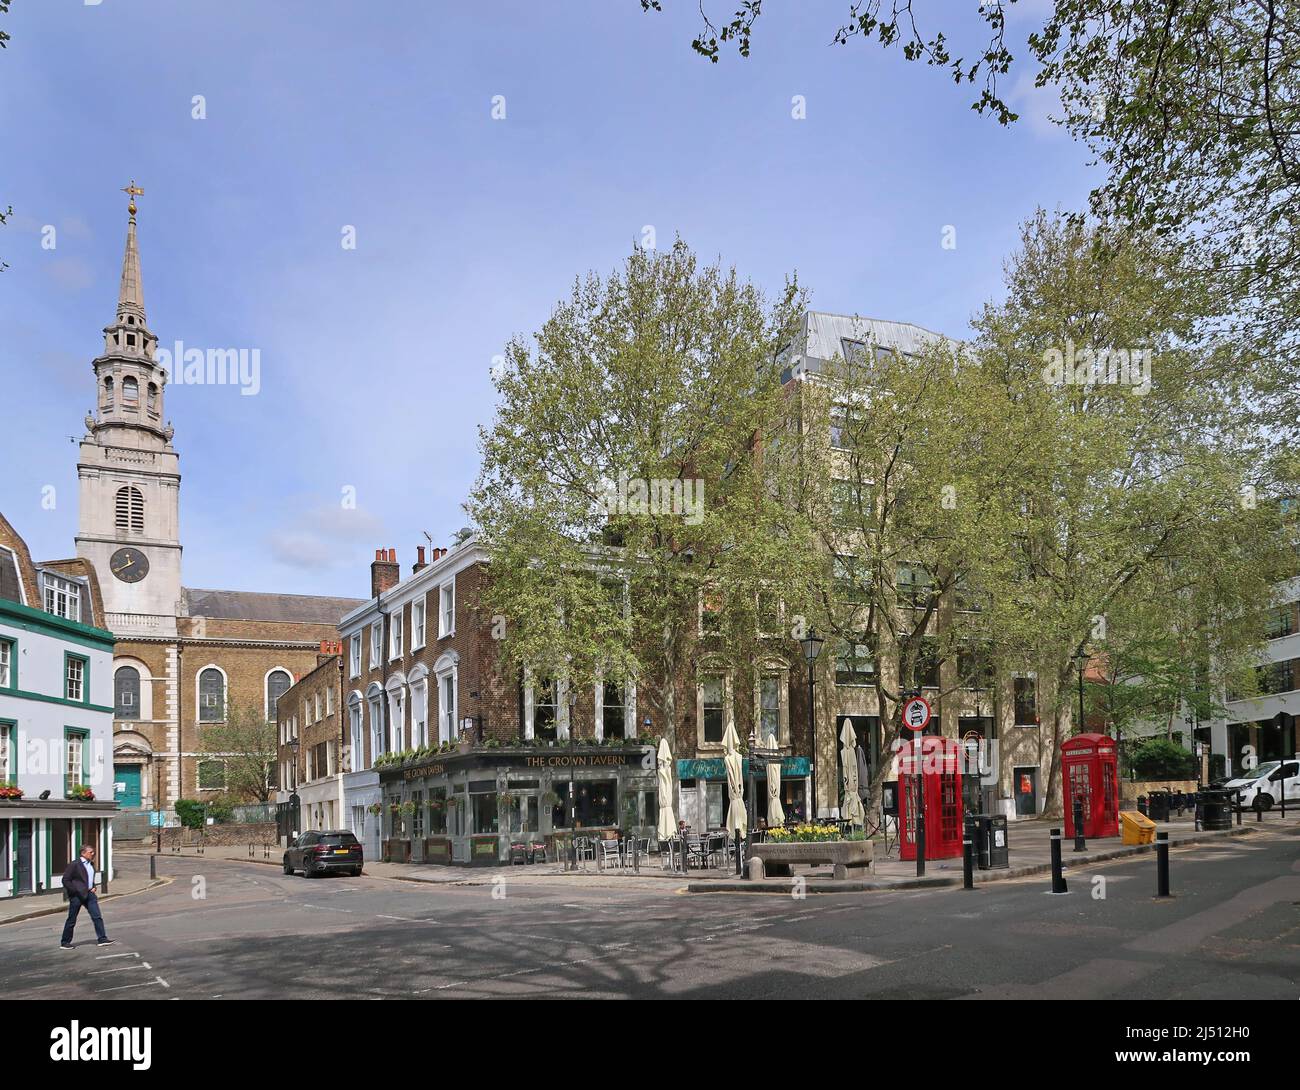 Clerkenwell Green, London, UK. St James church and The Crown pub (centre) Stock Photo